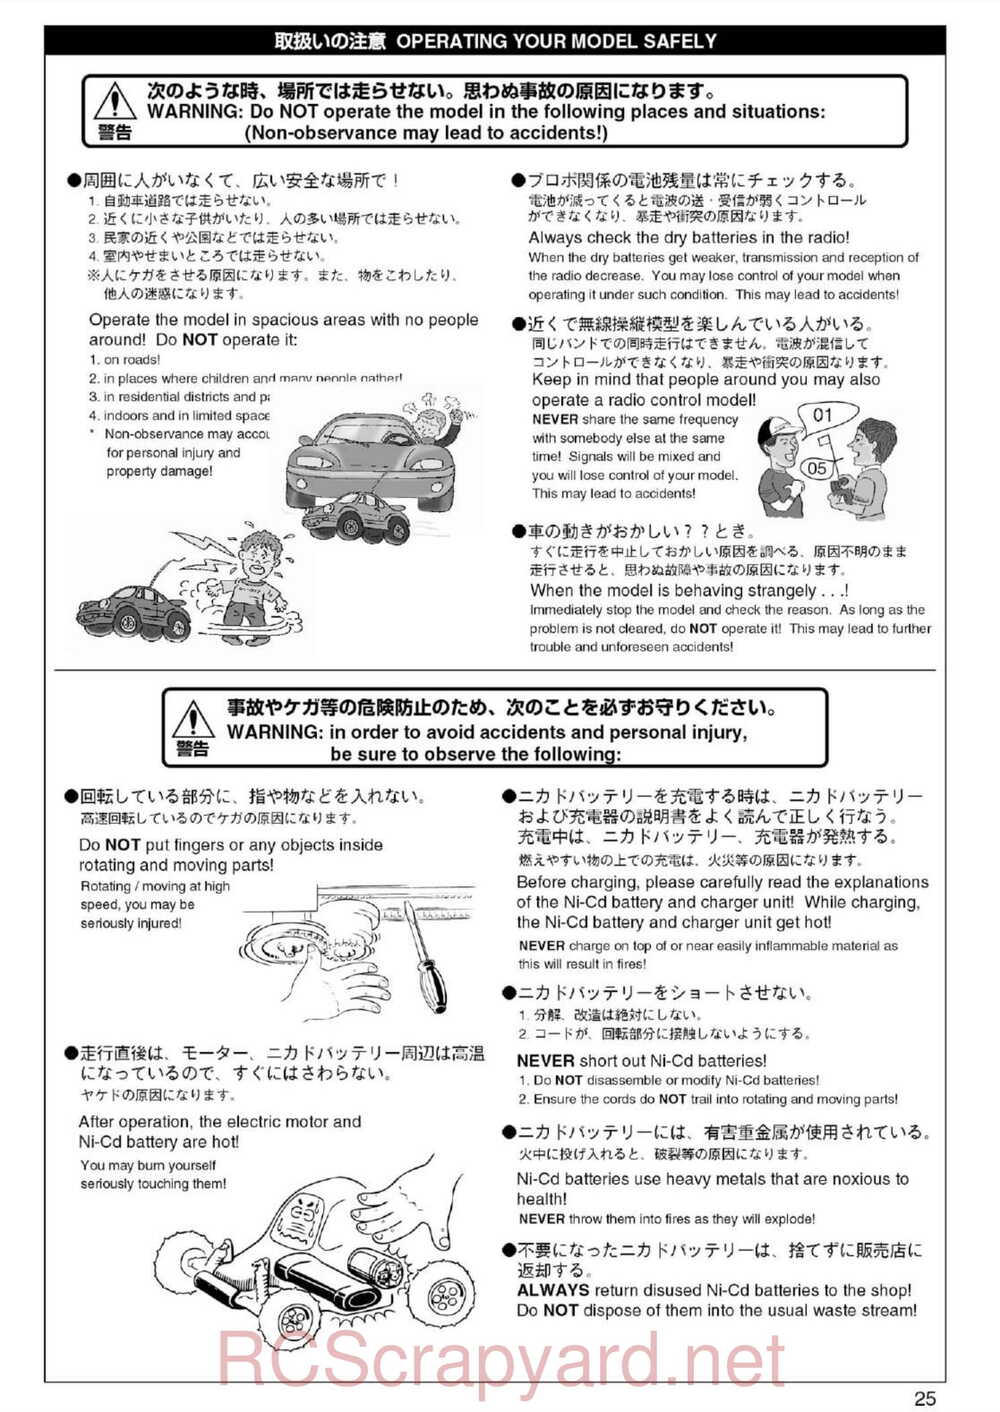 Kyosho - 30074 - Ultima-RB5 - Manual - Page 25